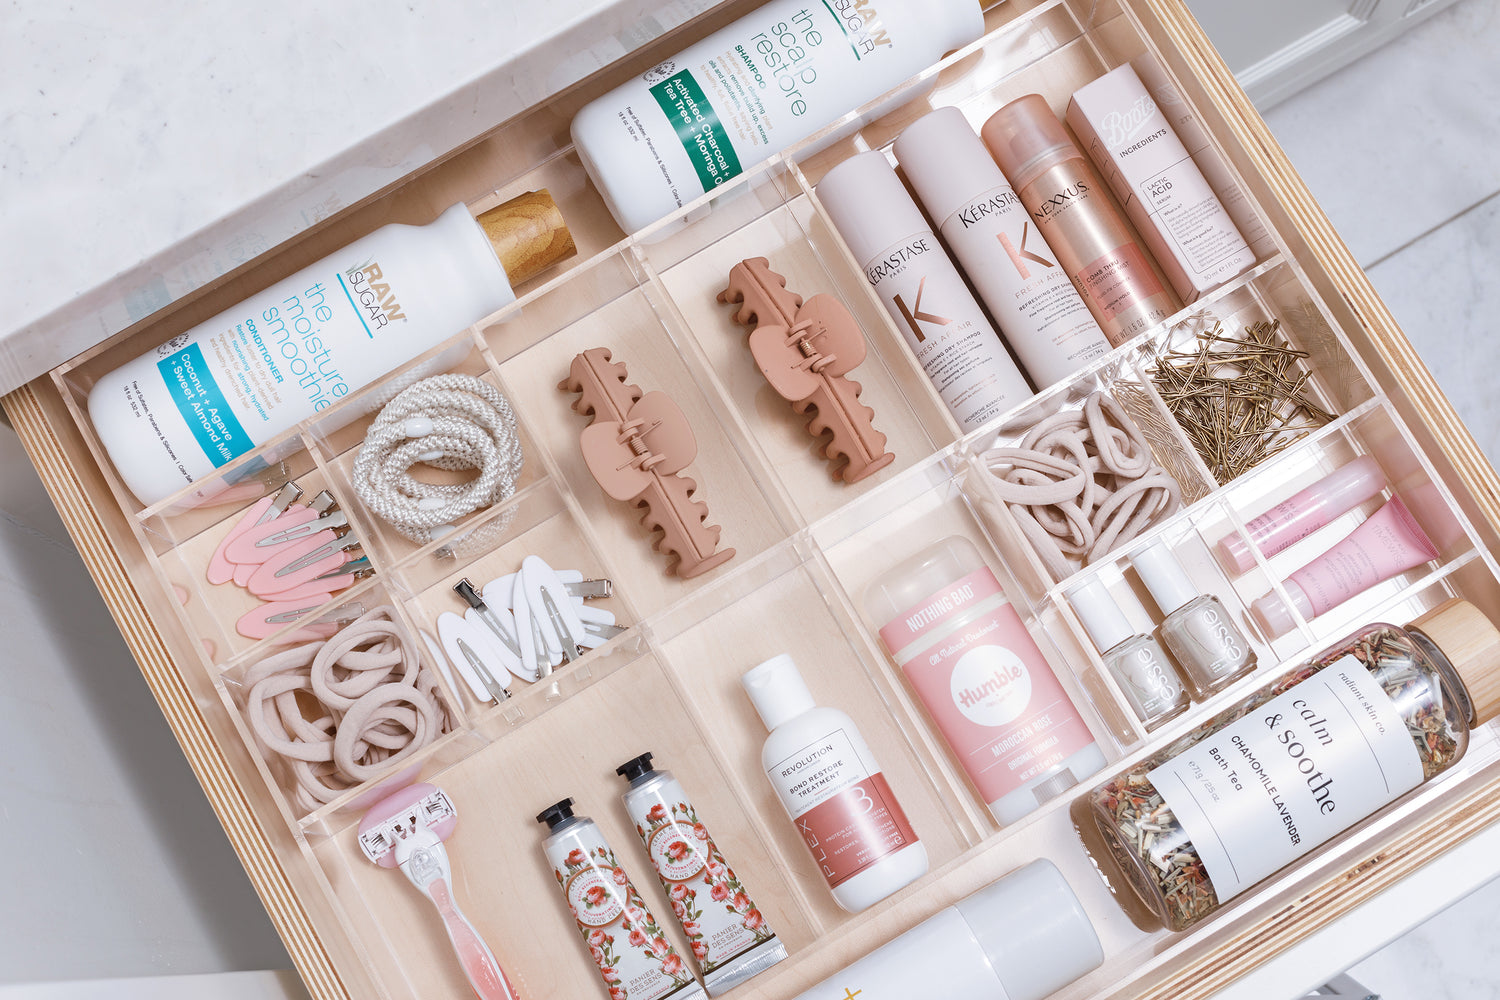 Immaculate bathroom drawer using a Sydney custom-fit organizer to contain products such as hair ties, nail polish, and lotion.